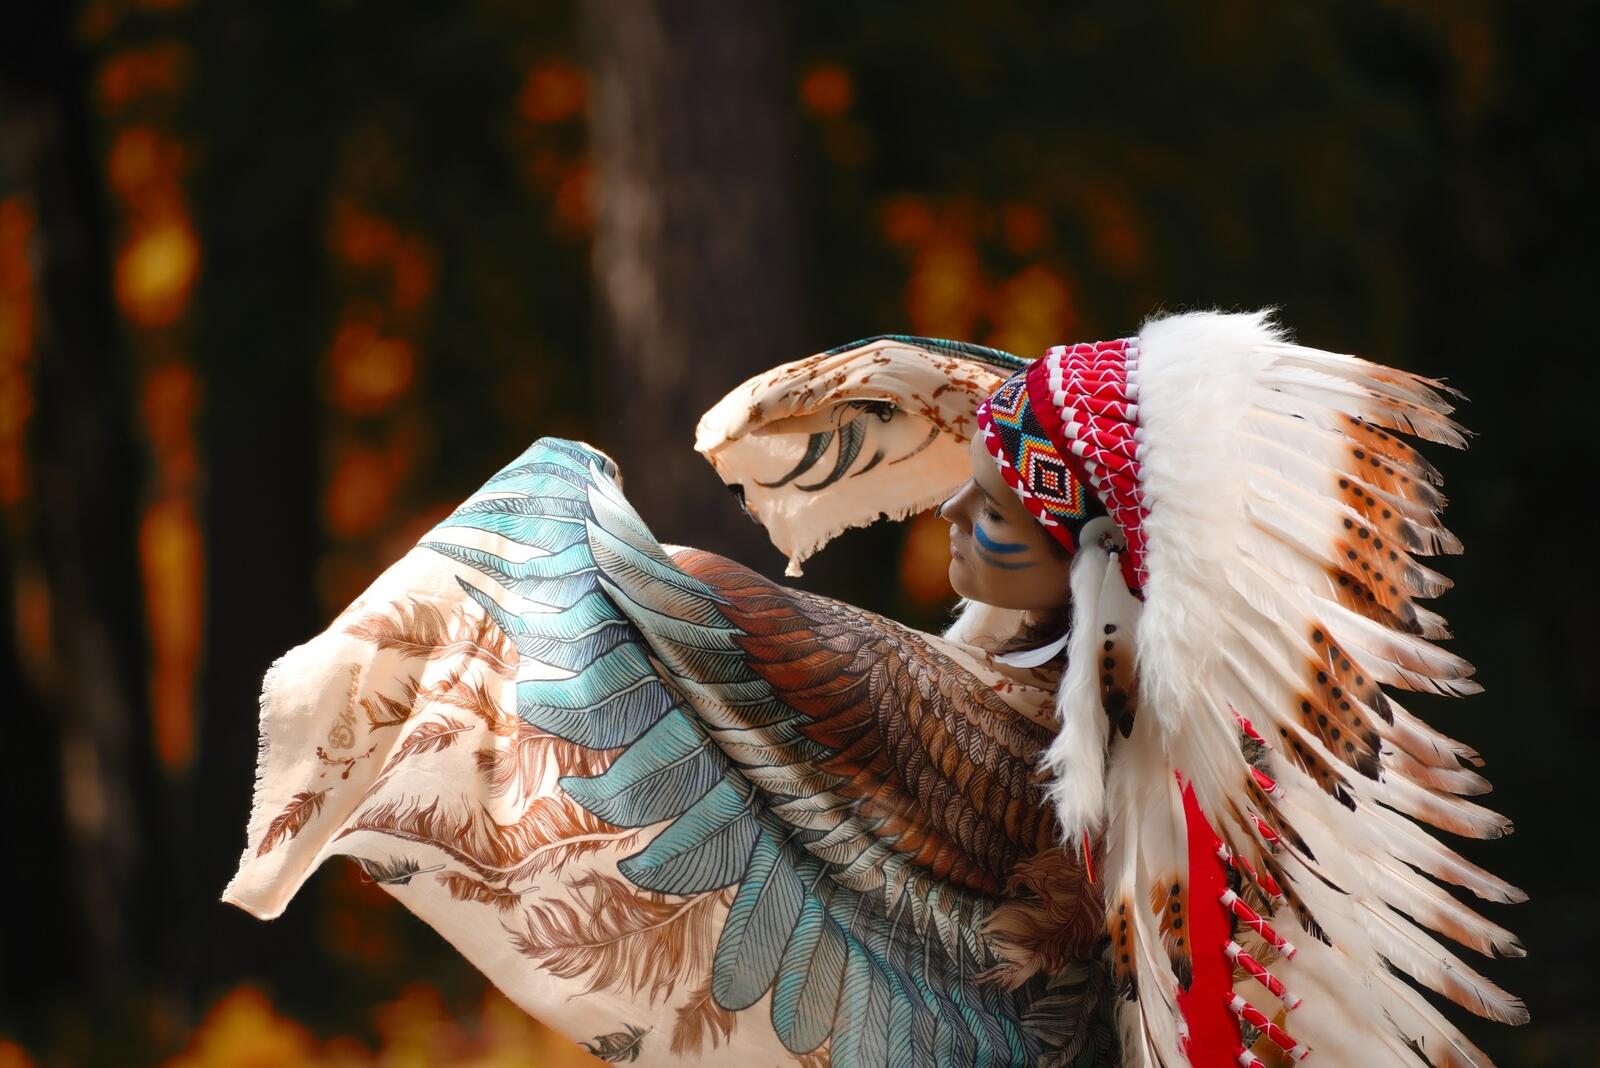 Wallpapers feathers woman wallpaper native american on the desktop